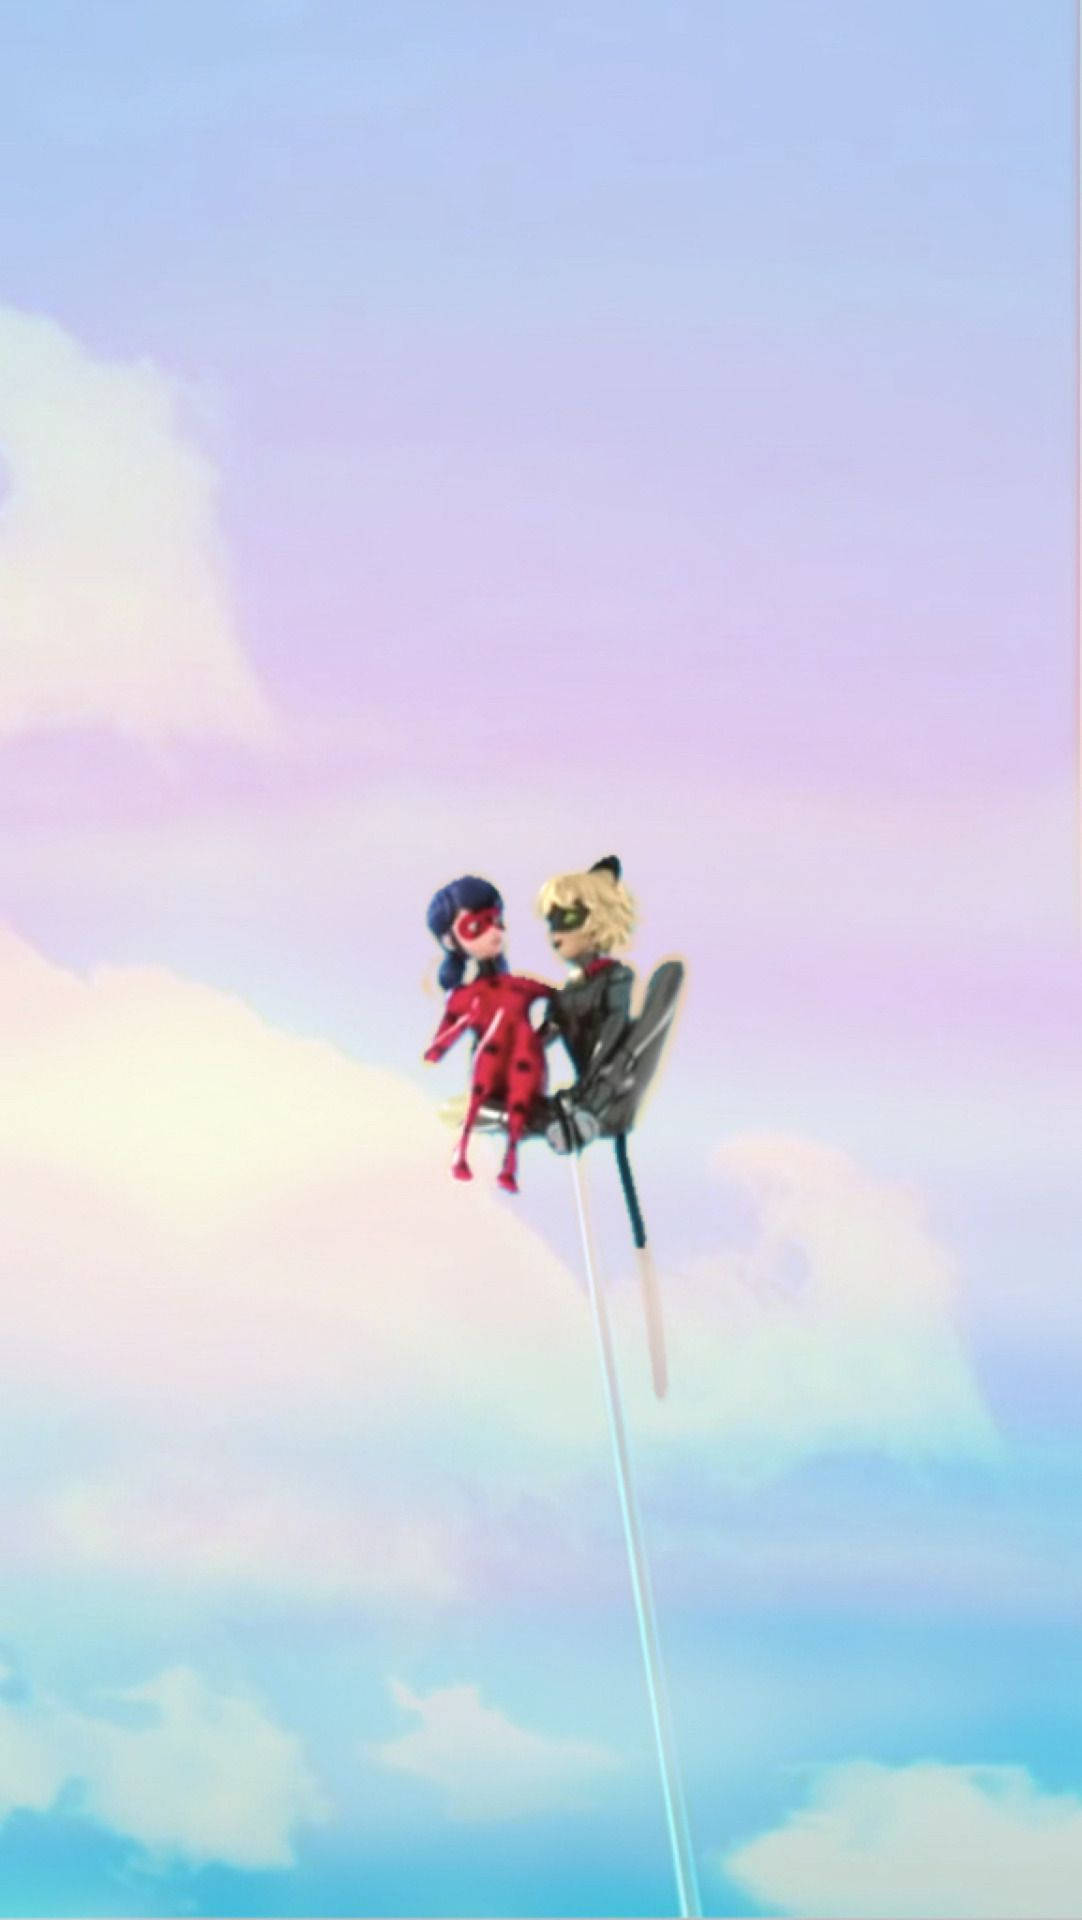 Miraculous Ladybug And Cat Noir In Air Background